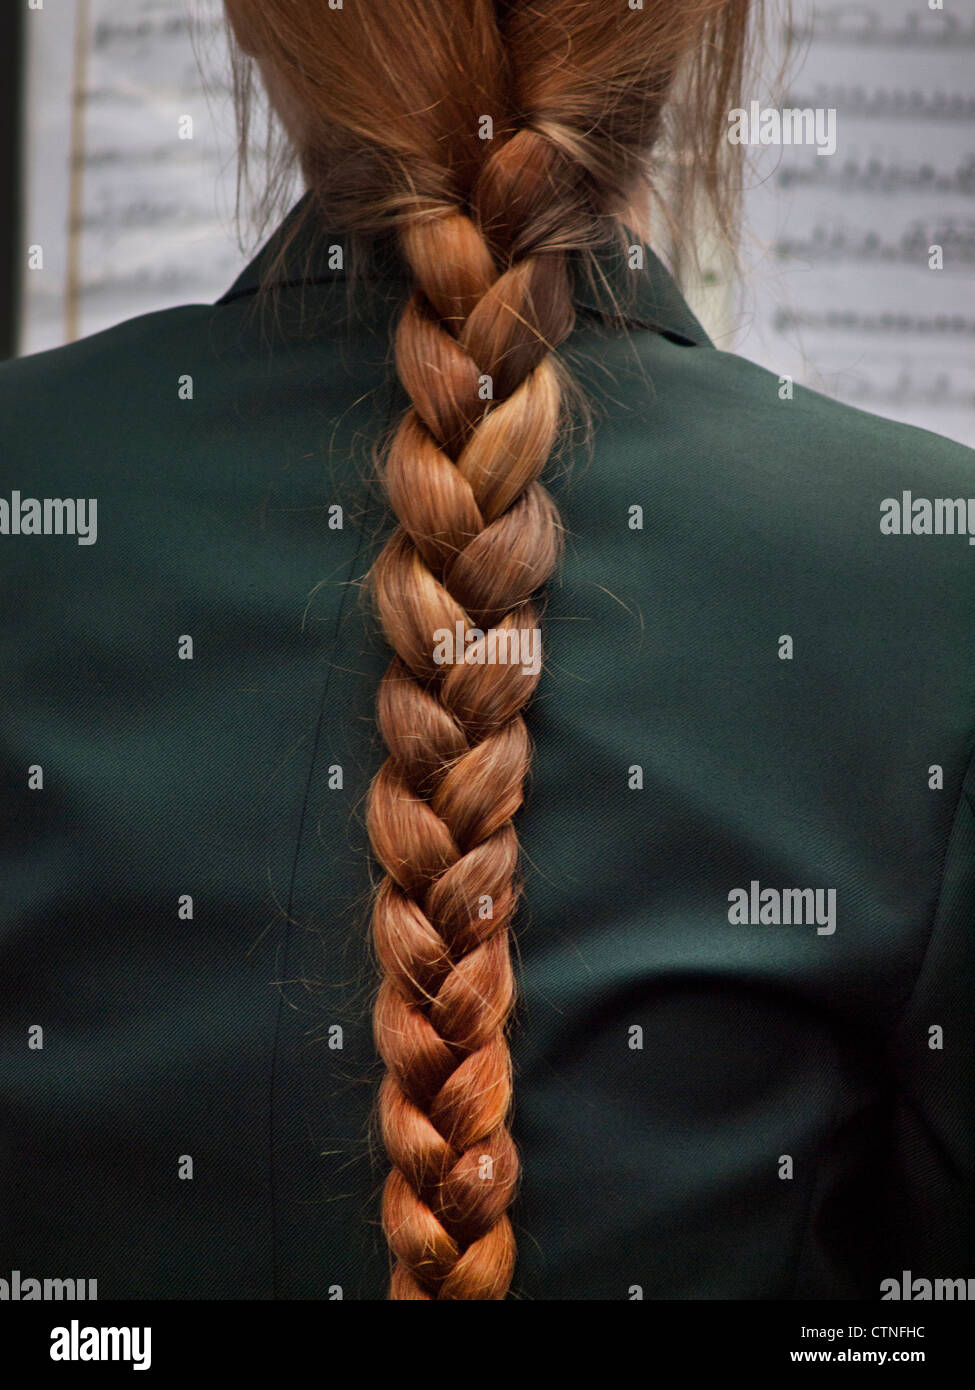 A strong plait of hair hangs down a girls back Stock Photo - Alamy